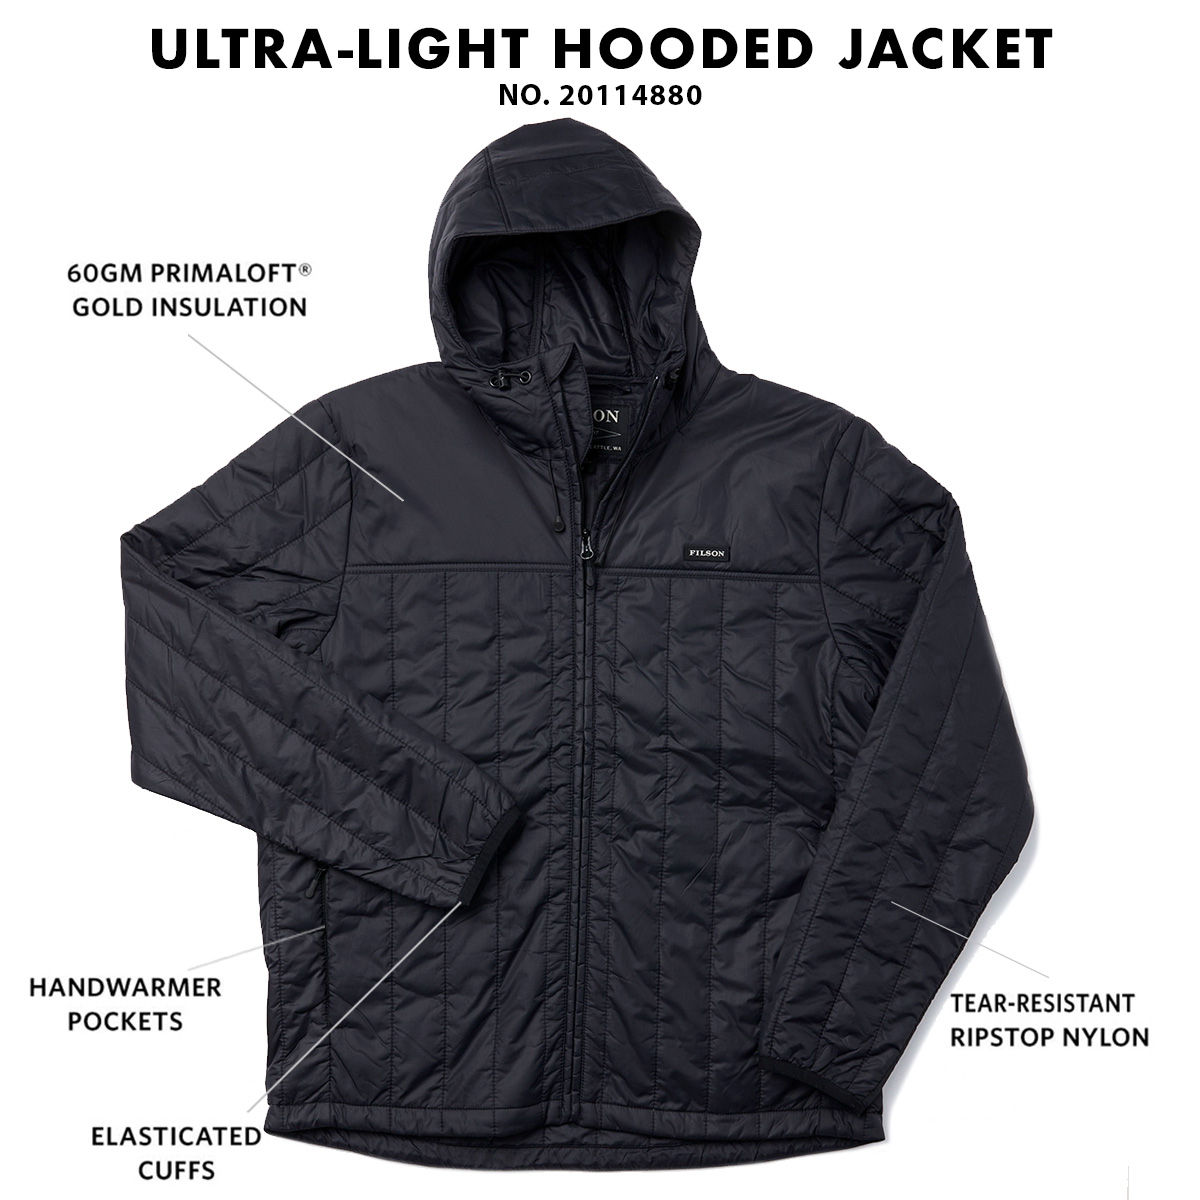 Filson Ultralight Hooded Jacket Black, PrimaLoft Gold’s Gold 60g insulation has an exceptional warmth to weight ratio, and retains 98% of its insulating properties when wet